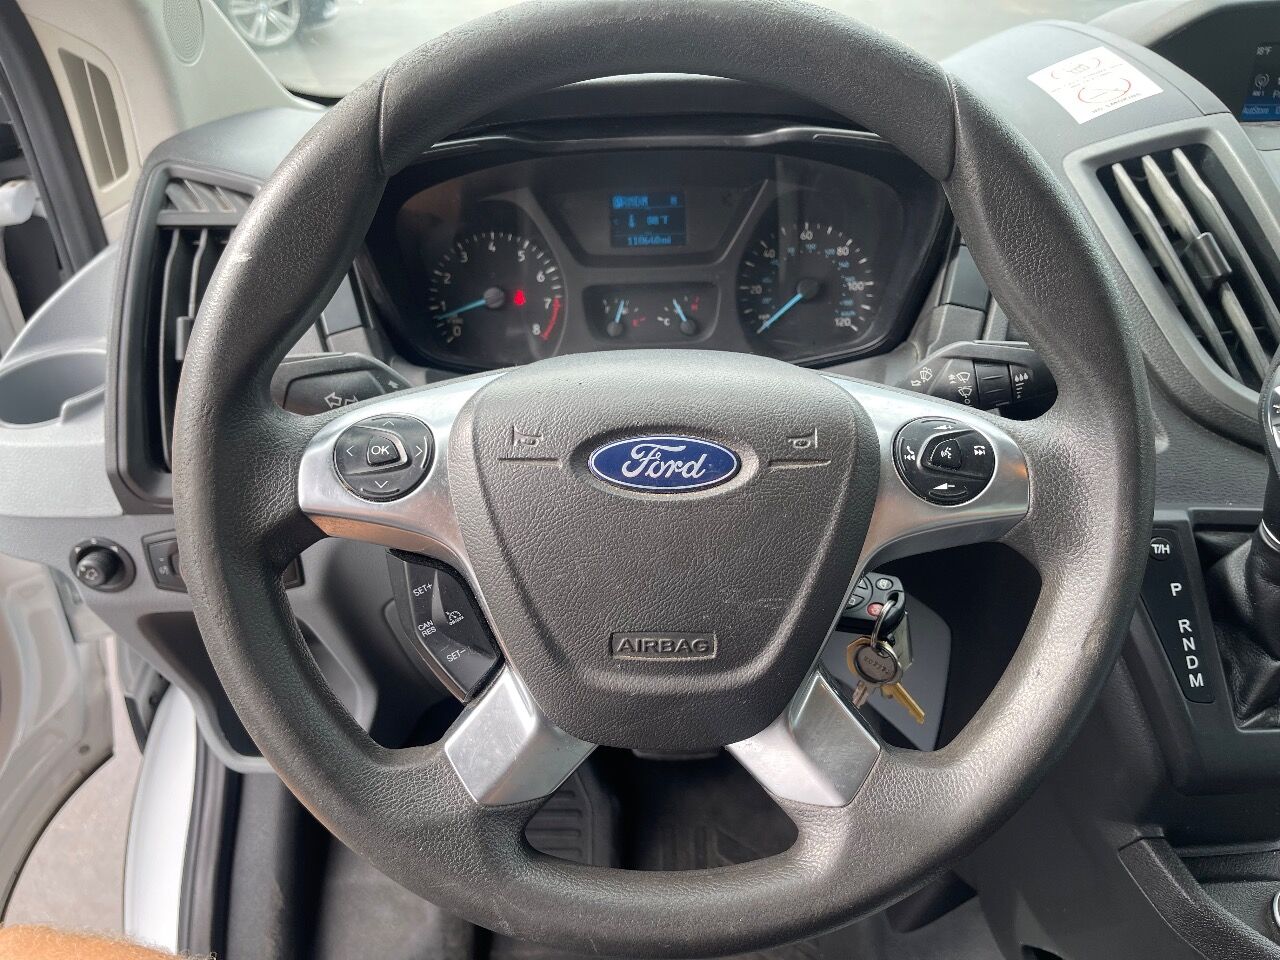 2018 FORD Transit Incomplete - $22,900